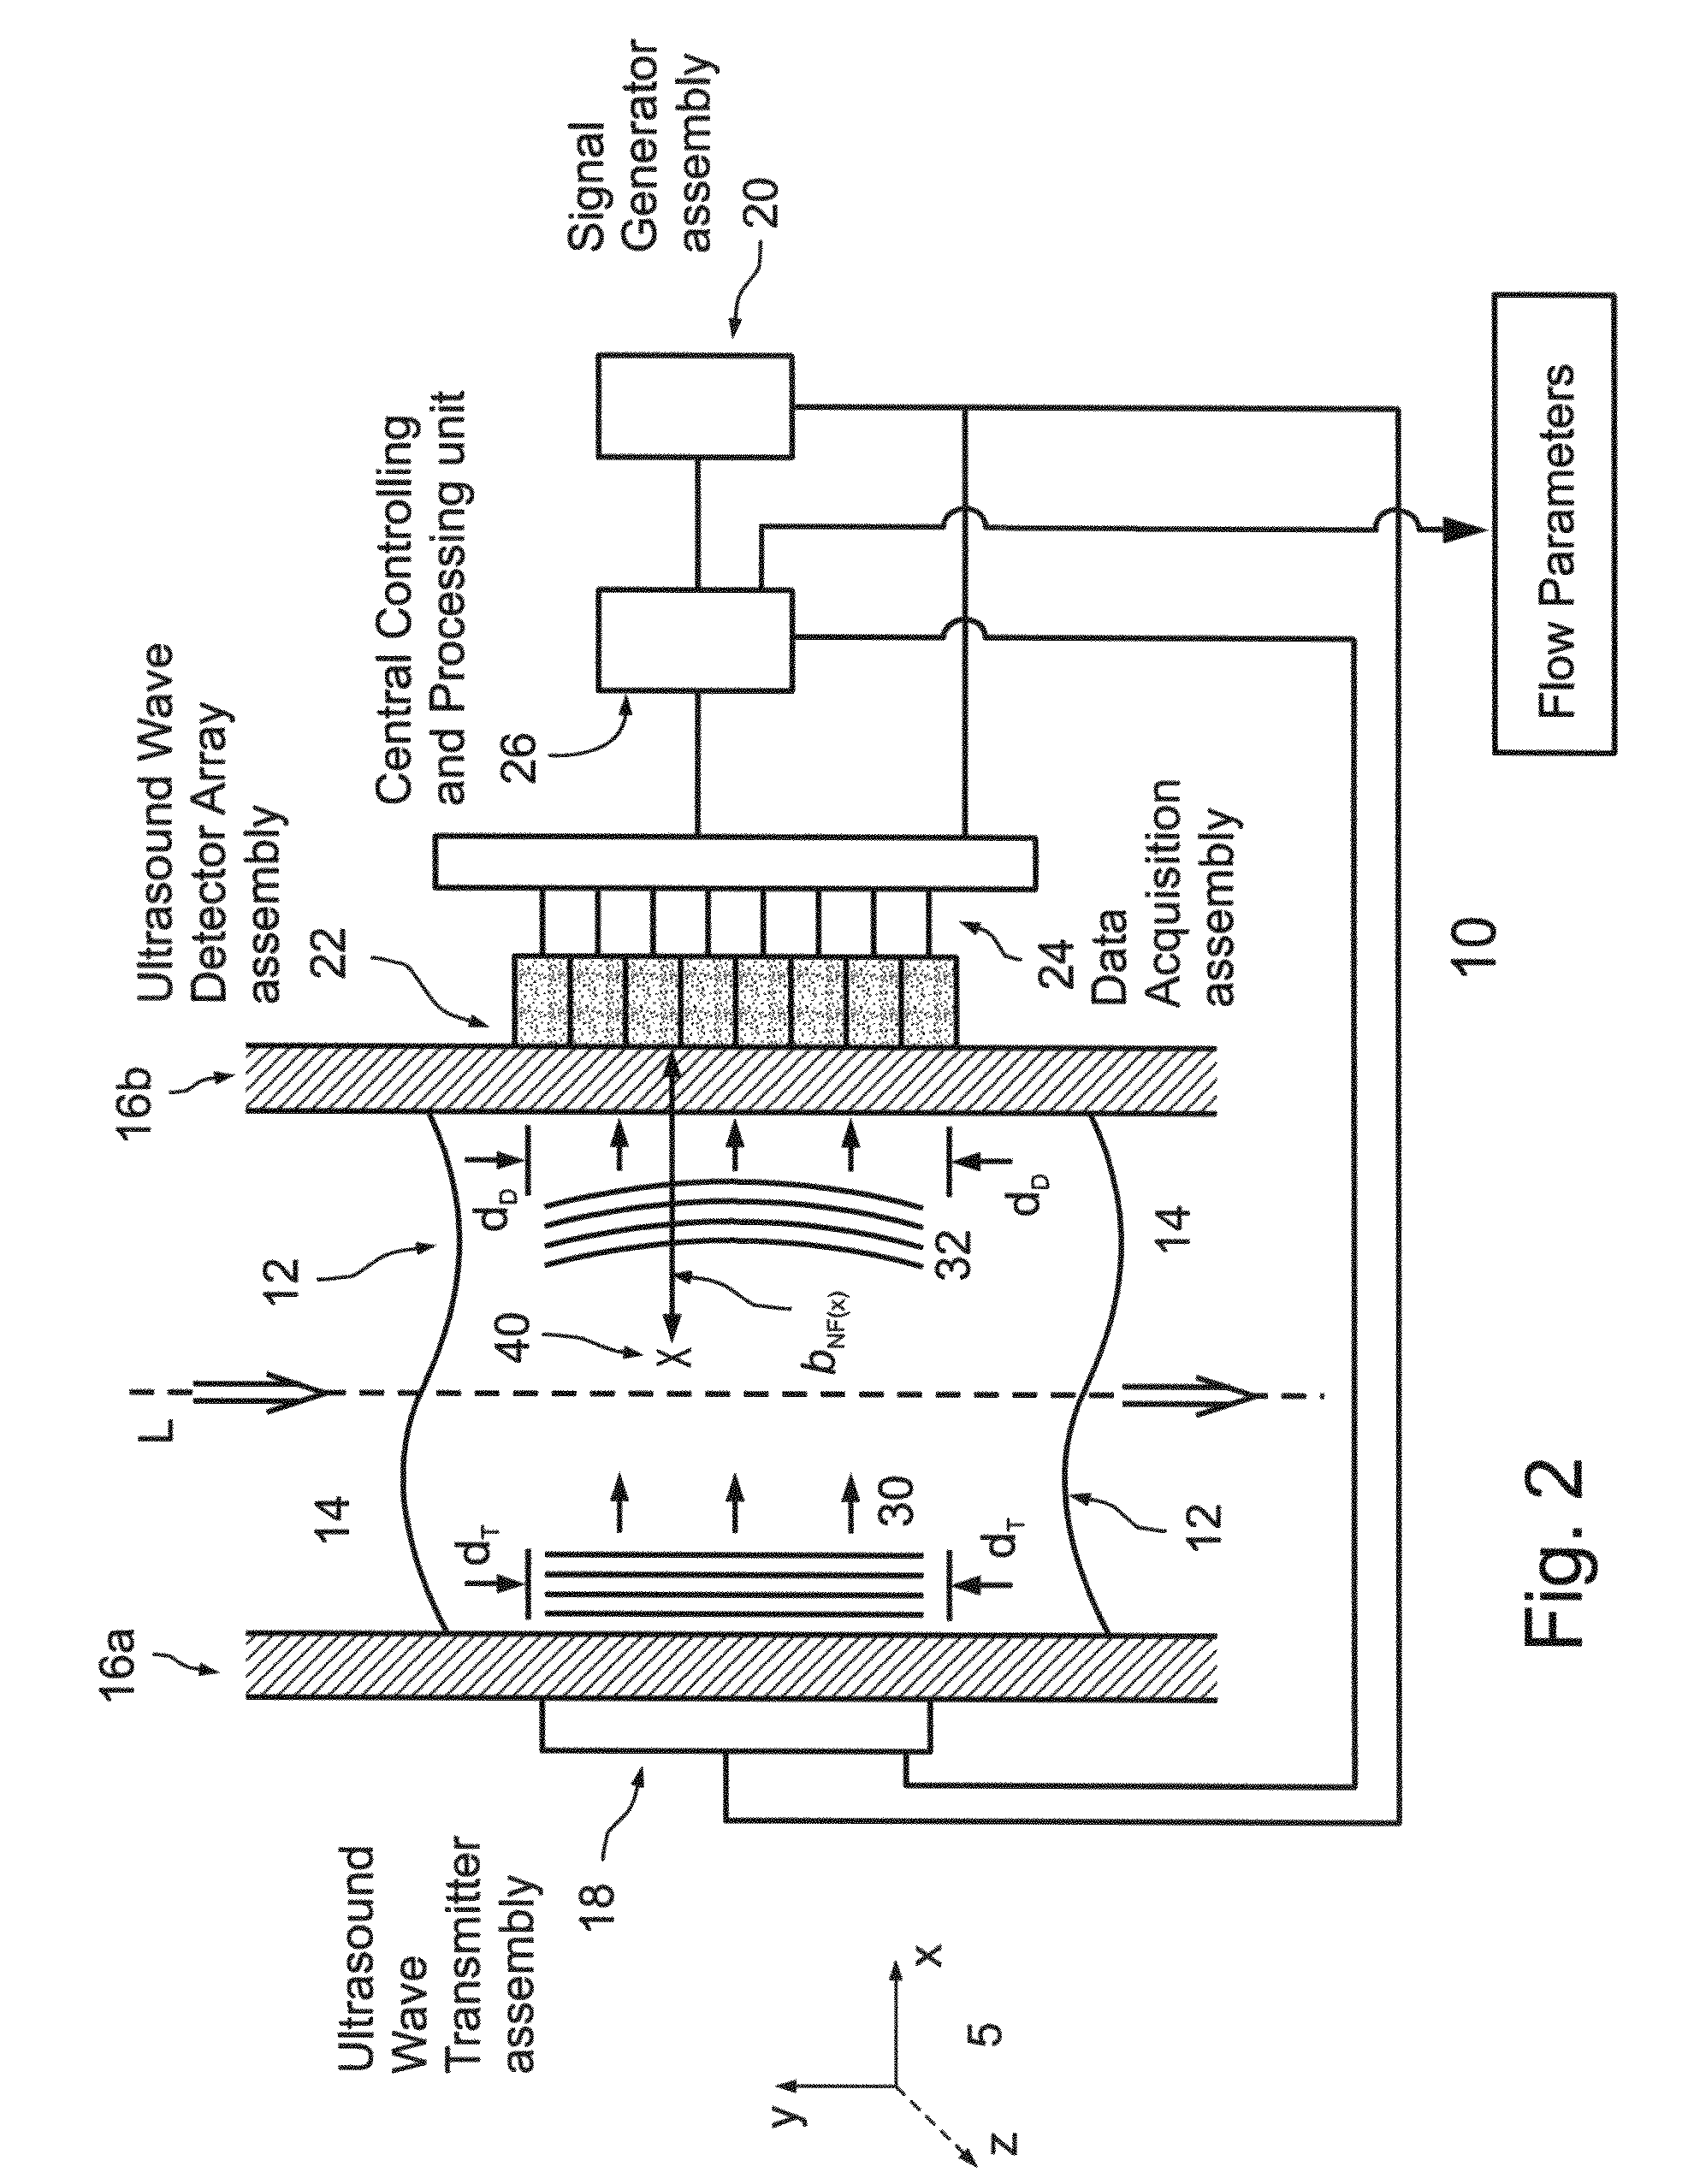 Ultrasonically determining flow parameters of a fluid flowing through a passage, by using far-field analysis